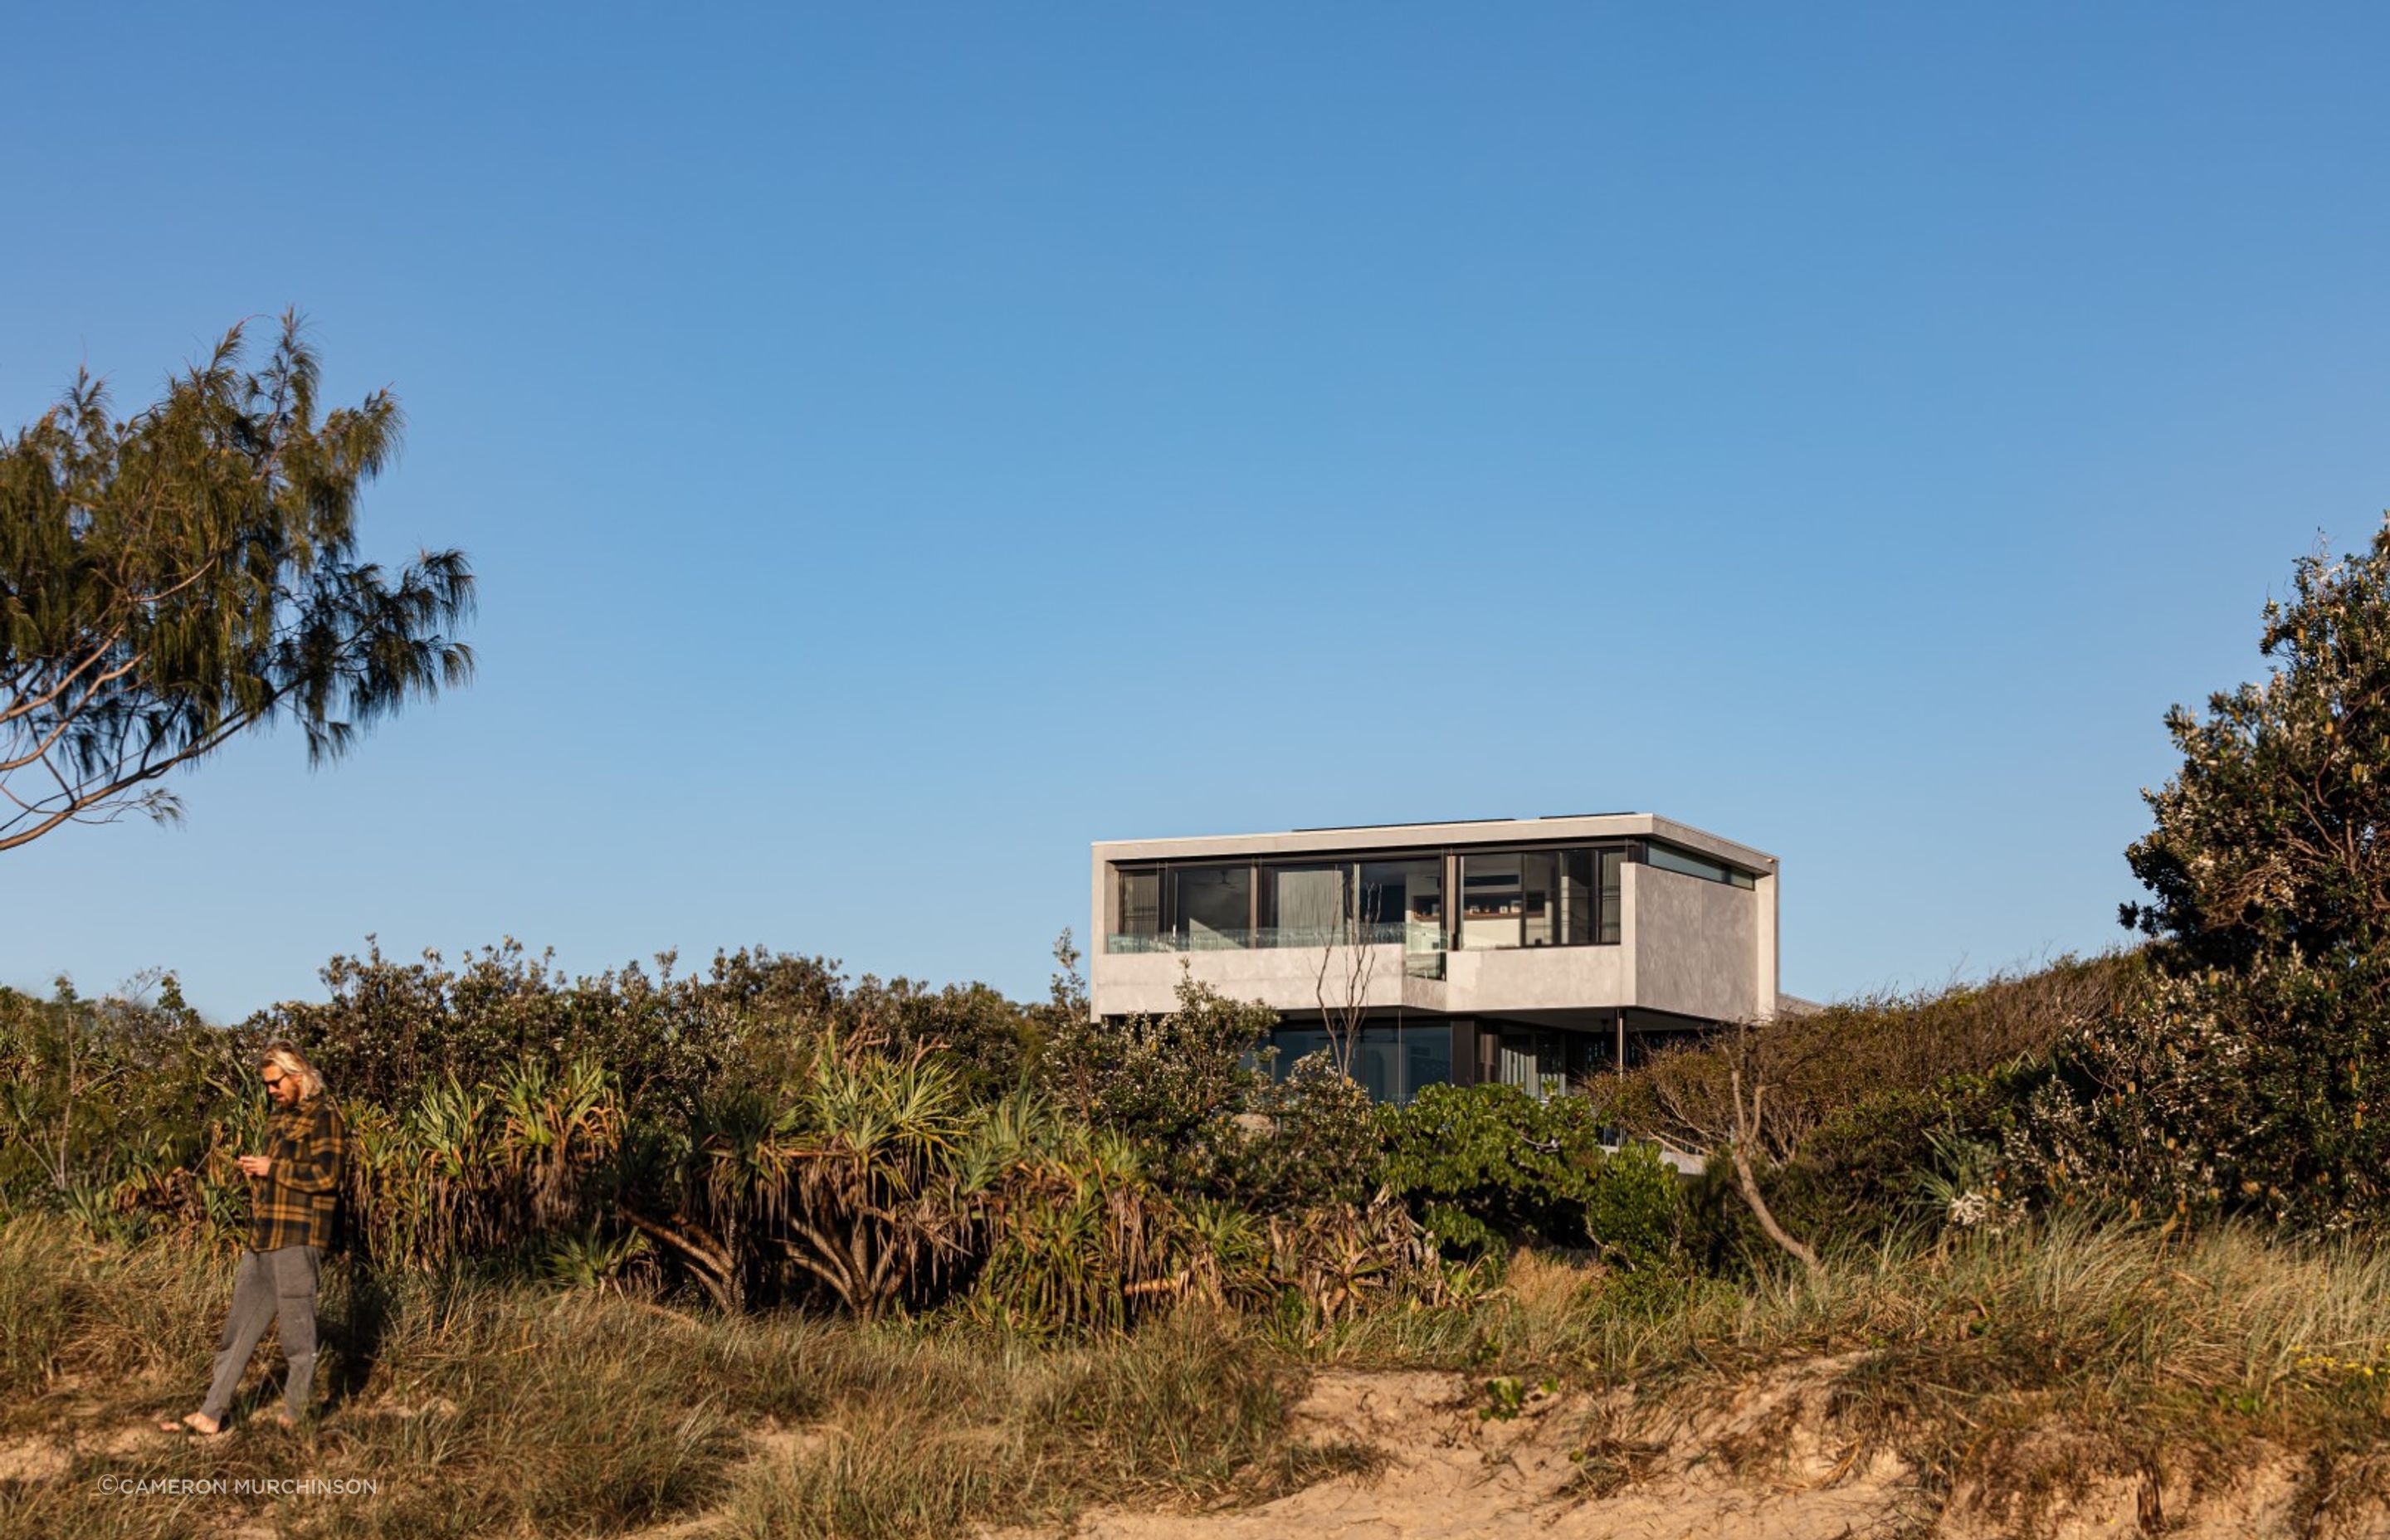 The House Behind The Dunes